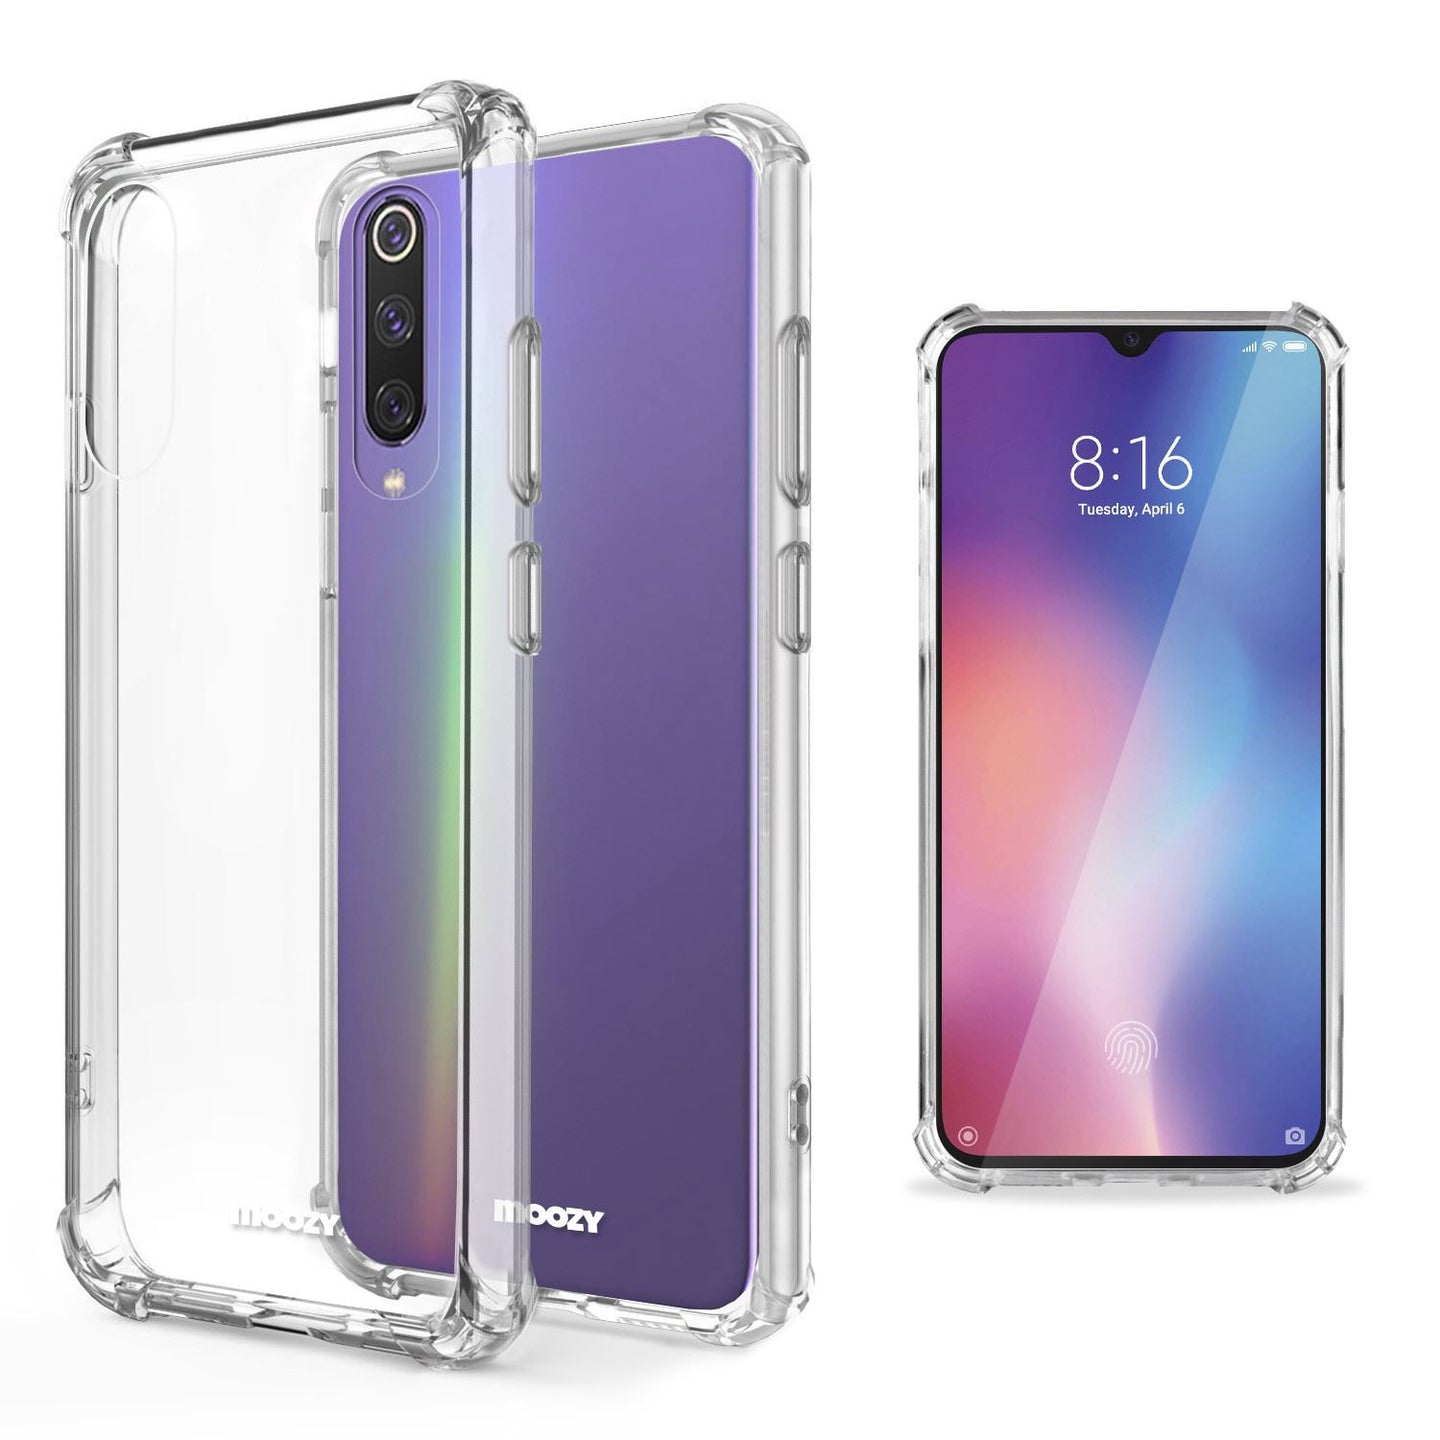 Moozy Shock Proof Silicone Case for Xiaomi Mi 9 SE - Transparent Crystal Clear Phone Case Soft TPU Cover